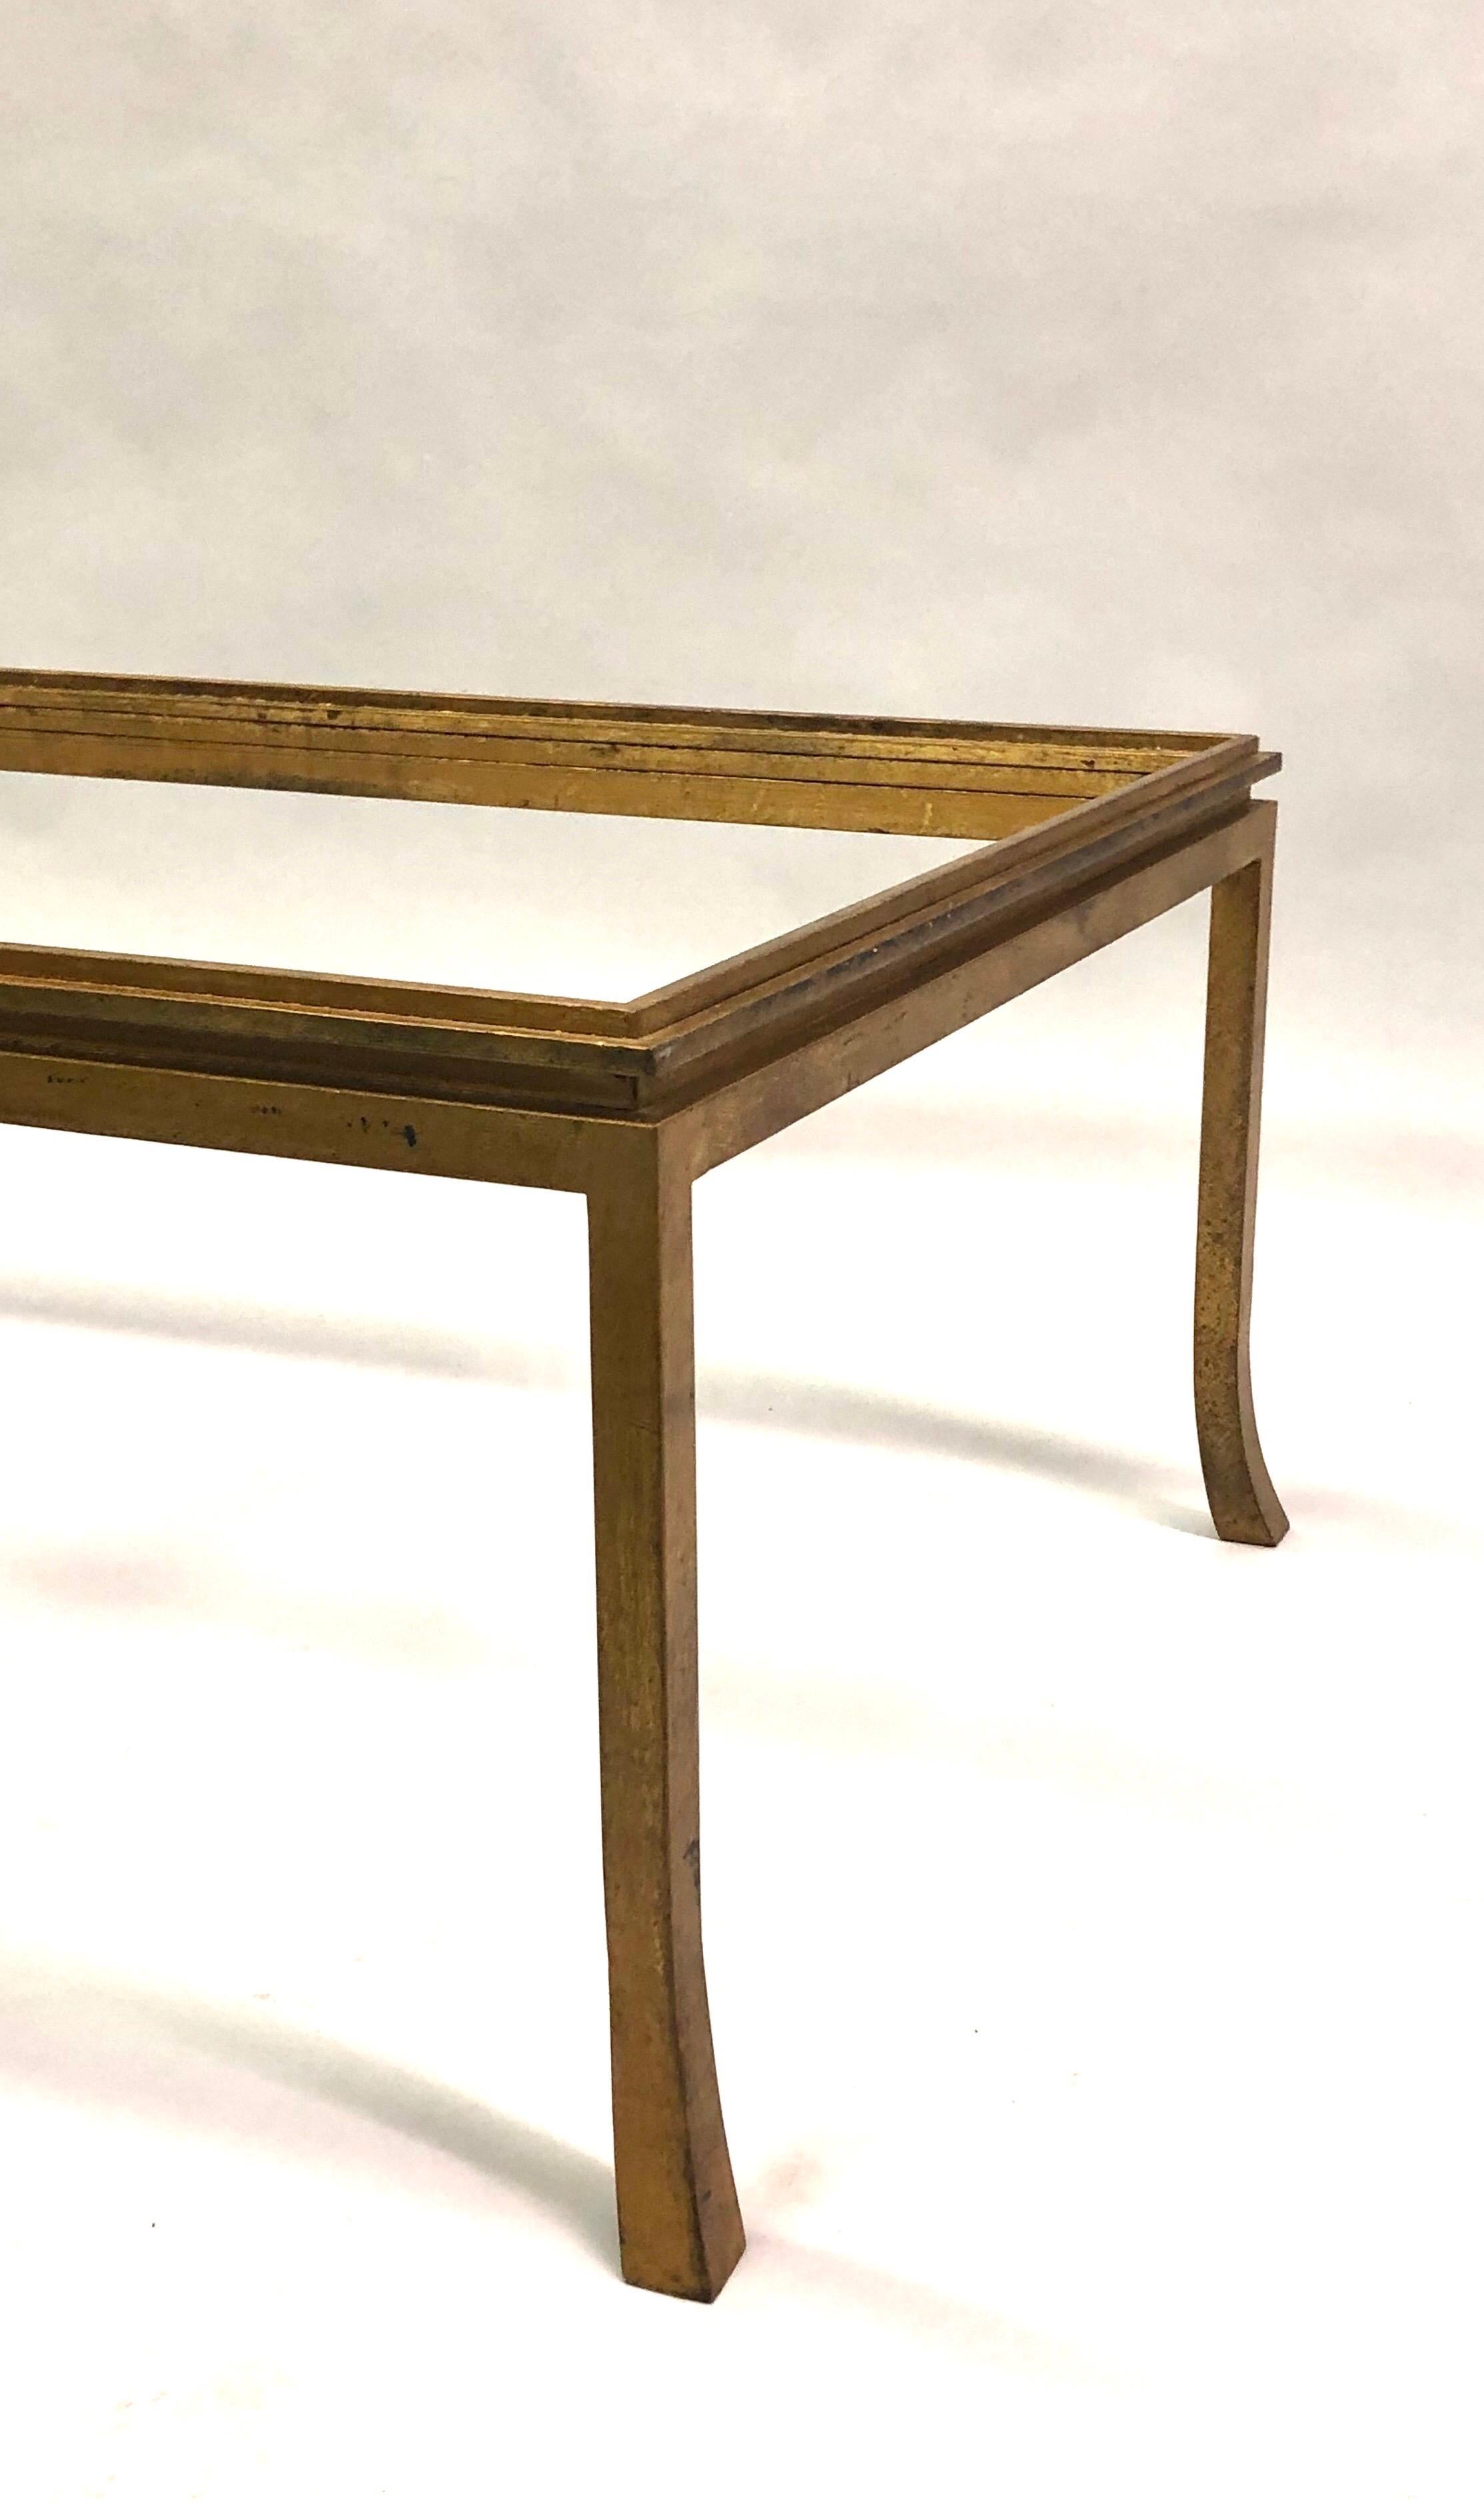 French Mid-Century Modern Gilt Wrought Iron Coffee Table by Maison Ramsay, 1970 For Sale 2